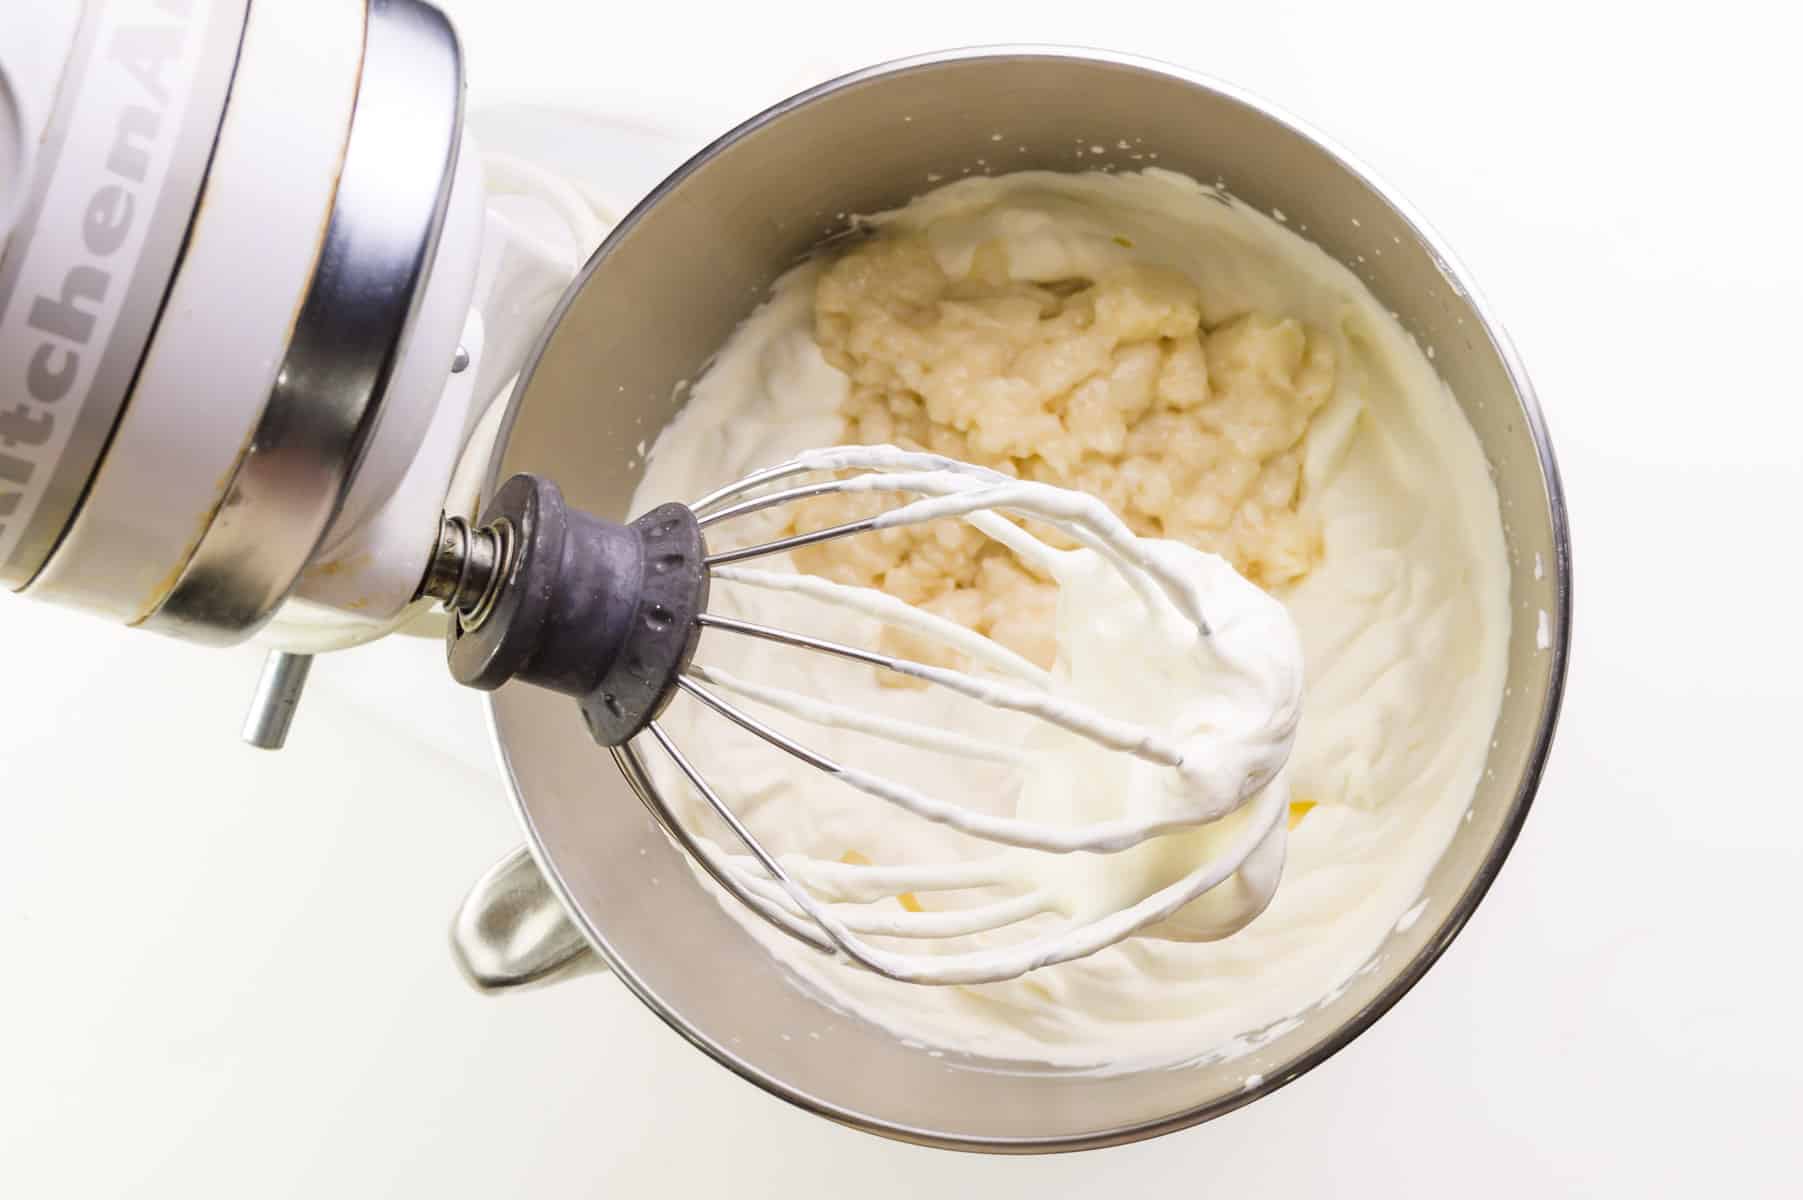 A marshmallow mixture has been added to whipped cream in a stand mixer mixing bowl.